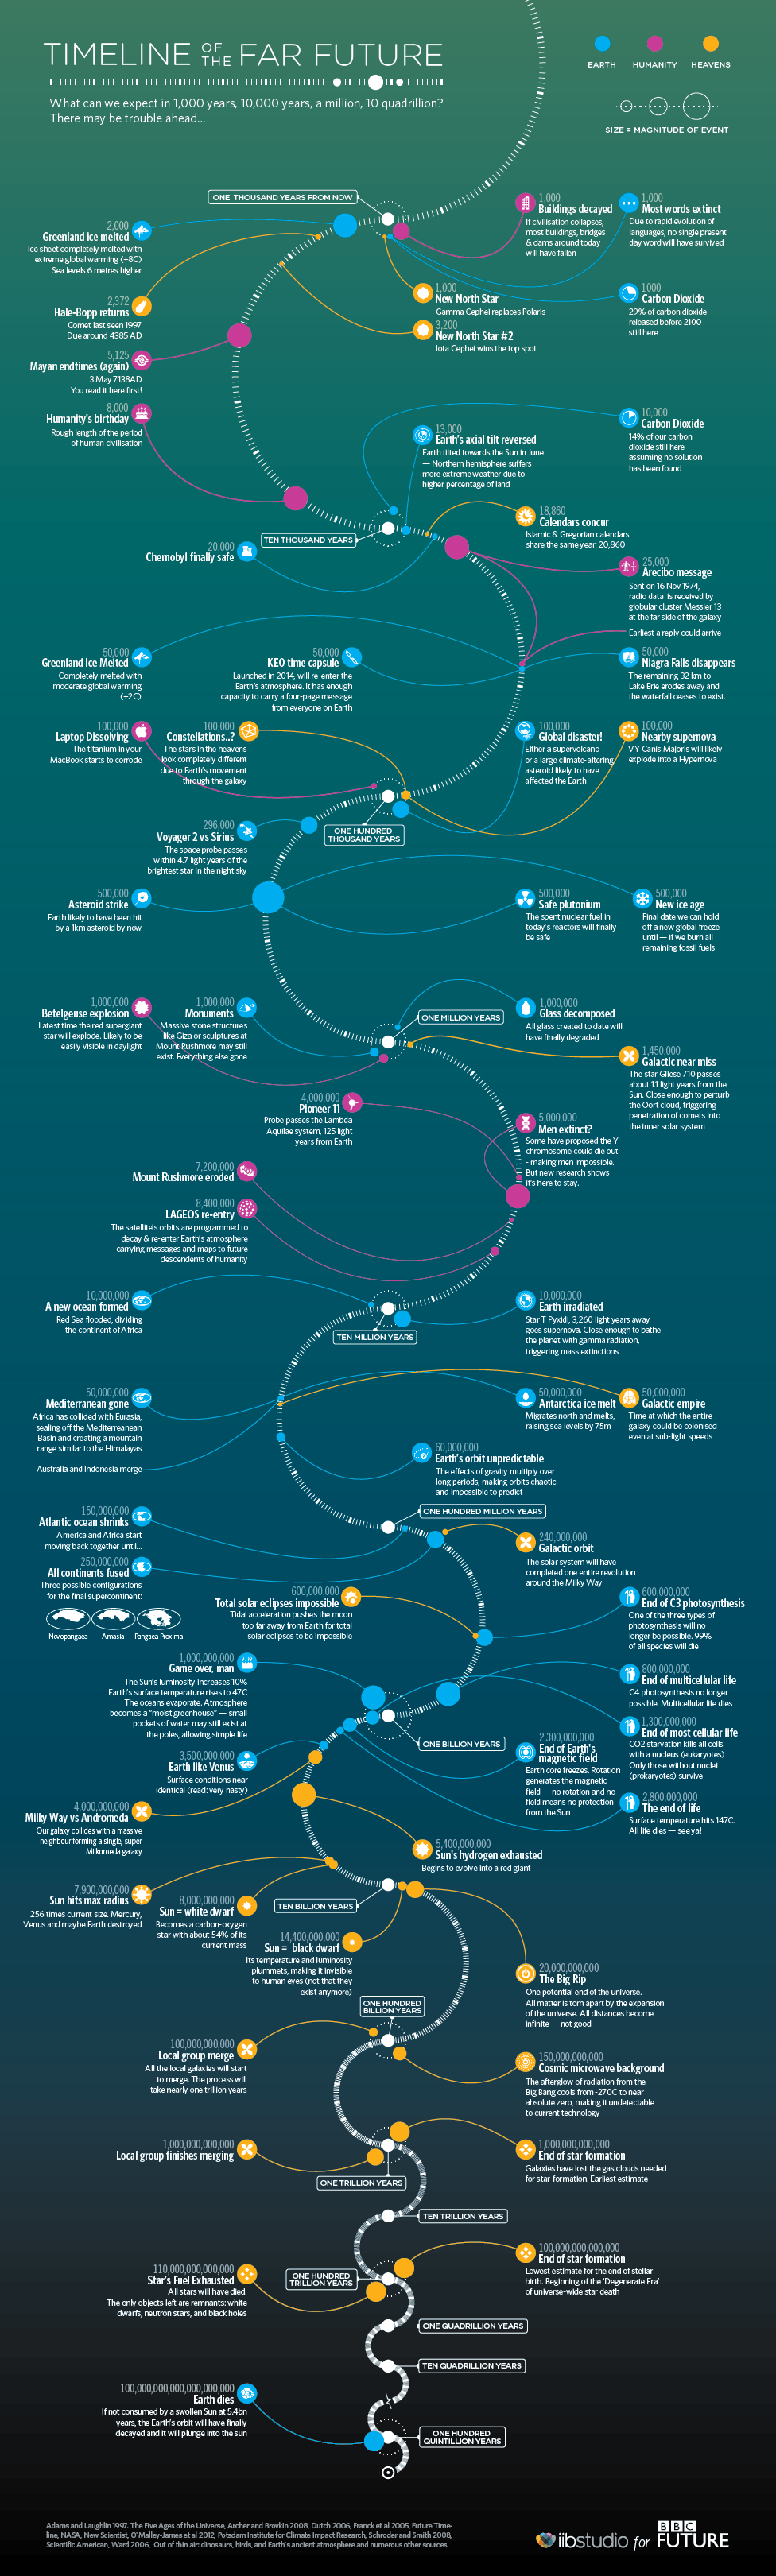 timeline-of-the-far-future_52d481e19c764.png